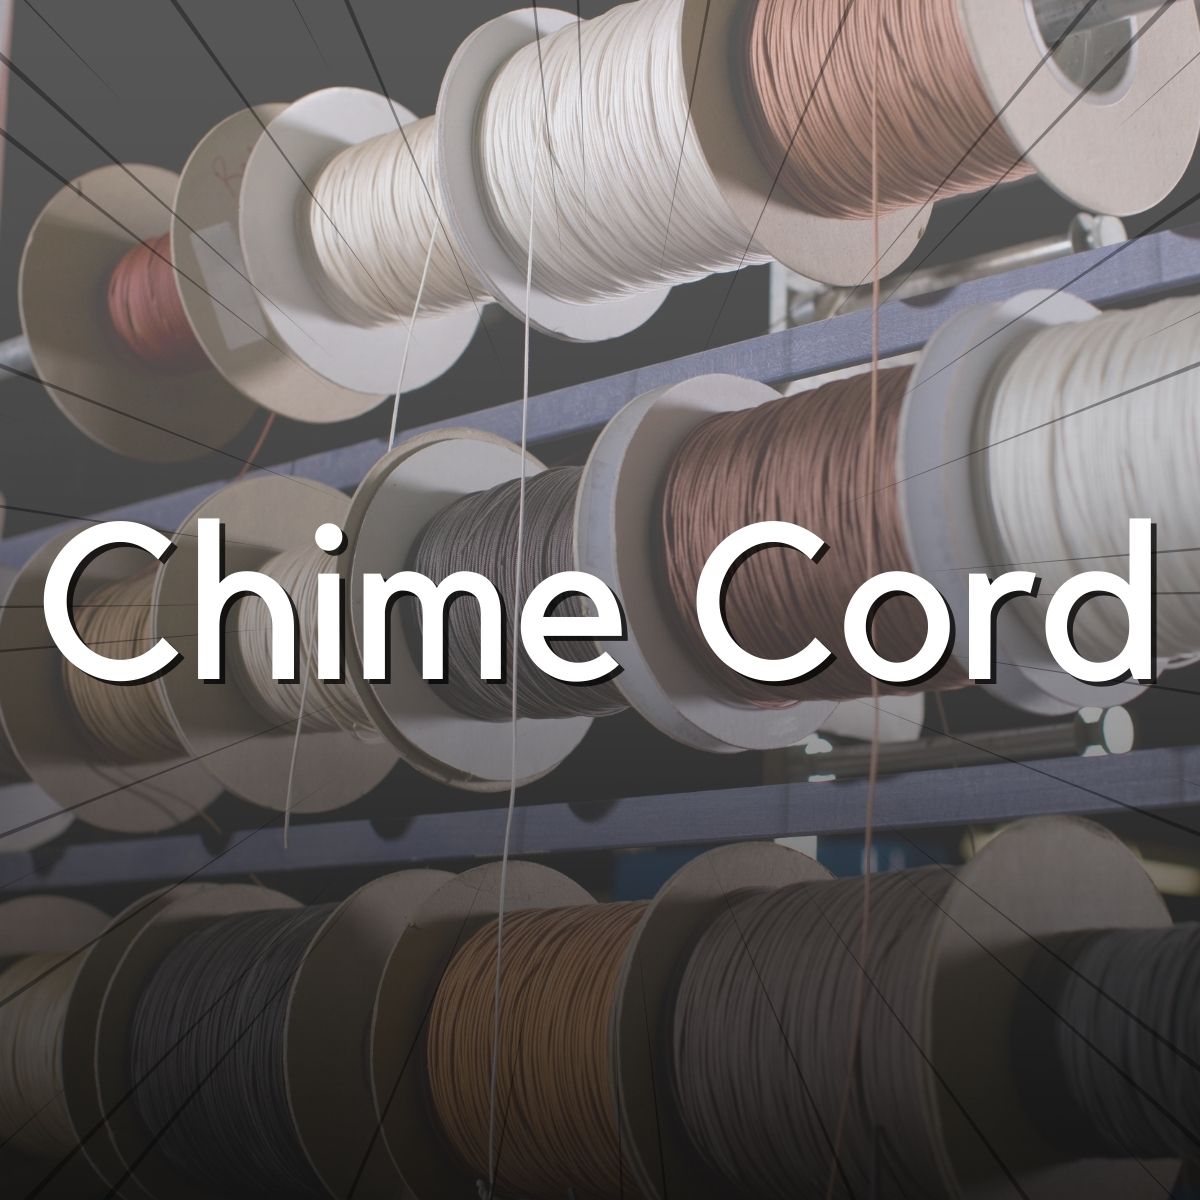 Chime Cord